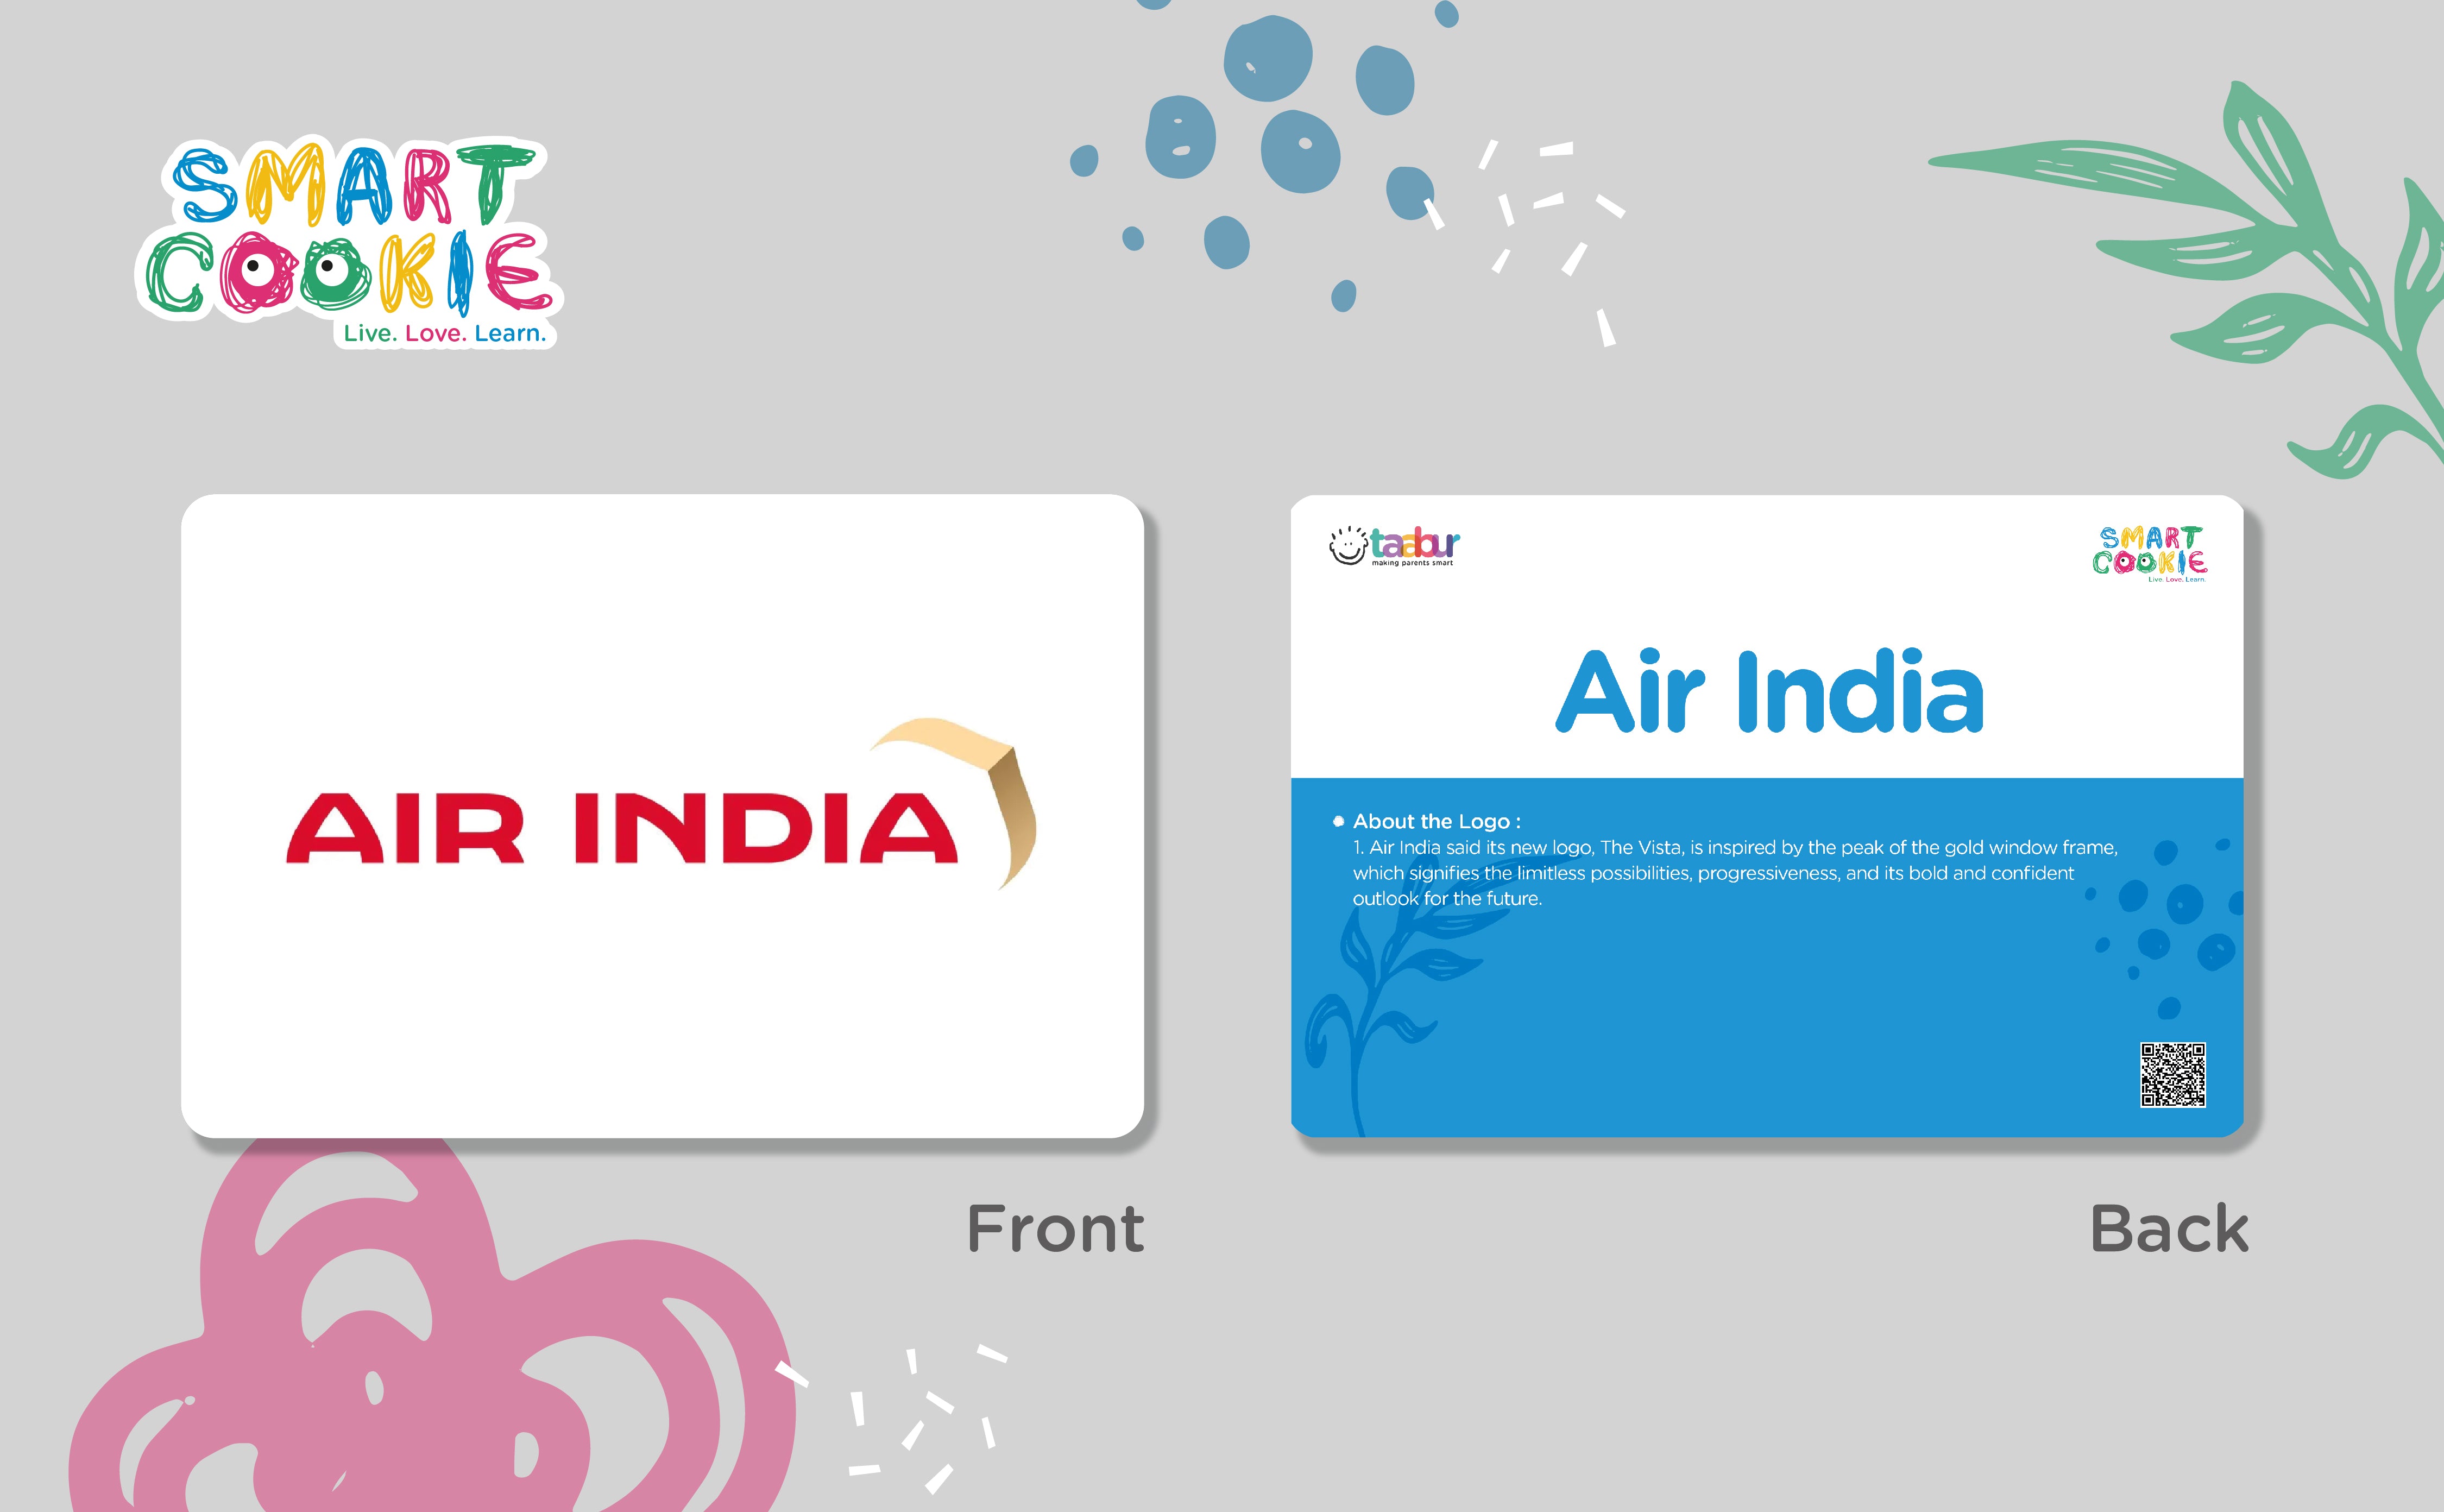 Indian Brand Logos - Interactive Flash Cards for Children (24 Cards) - for Kids Aged 4 to 6 Years Old